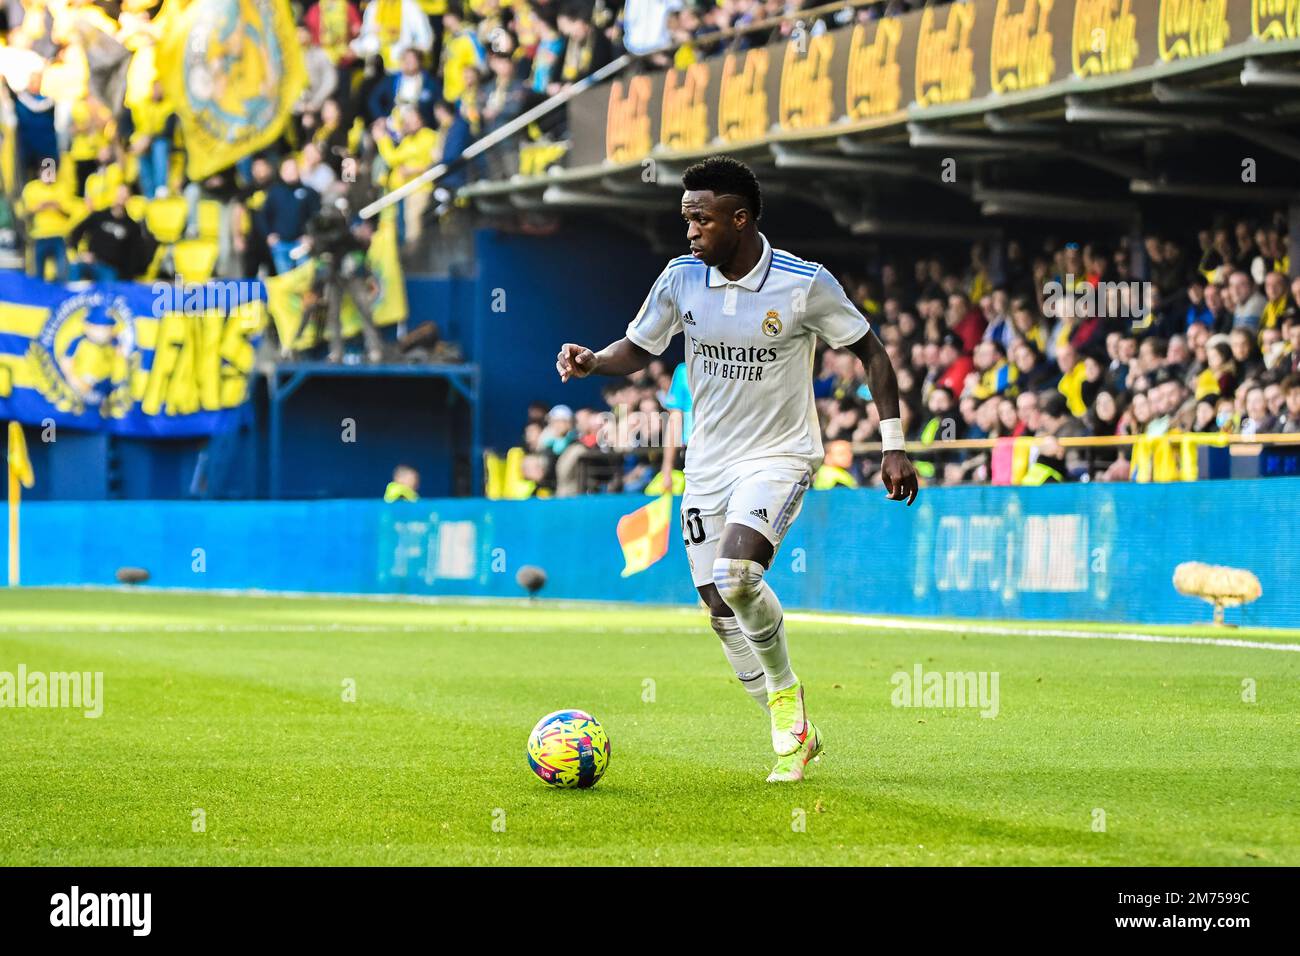 VILLARREAL, SPAIN - JANUARY 7: Vinicius Jr of Real Madrid CF control the ball to shoot during the match between Villarreal CF and Real Madrid CF of La Liga Santander on January 7, 2023 at Estadi de la Ceramica in Villarreal, Spain. (Photo by Samuel Carreño/ PX Images) Credit: Px Images/Alamy Live News Stock Photo